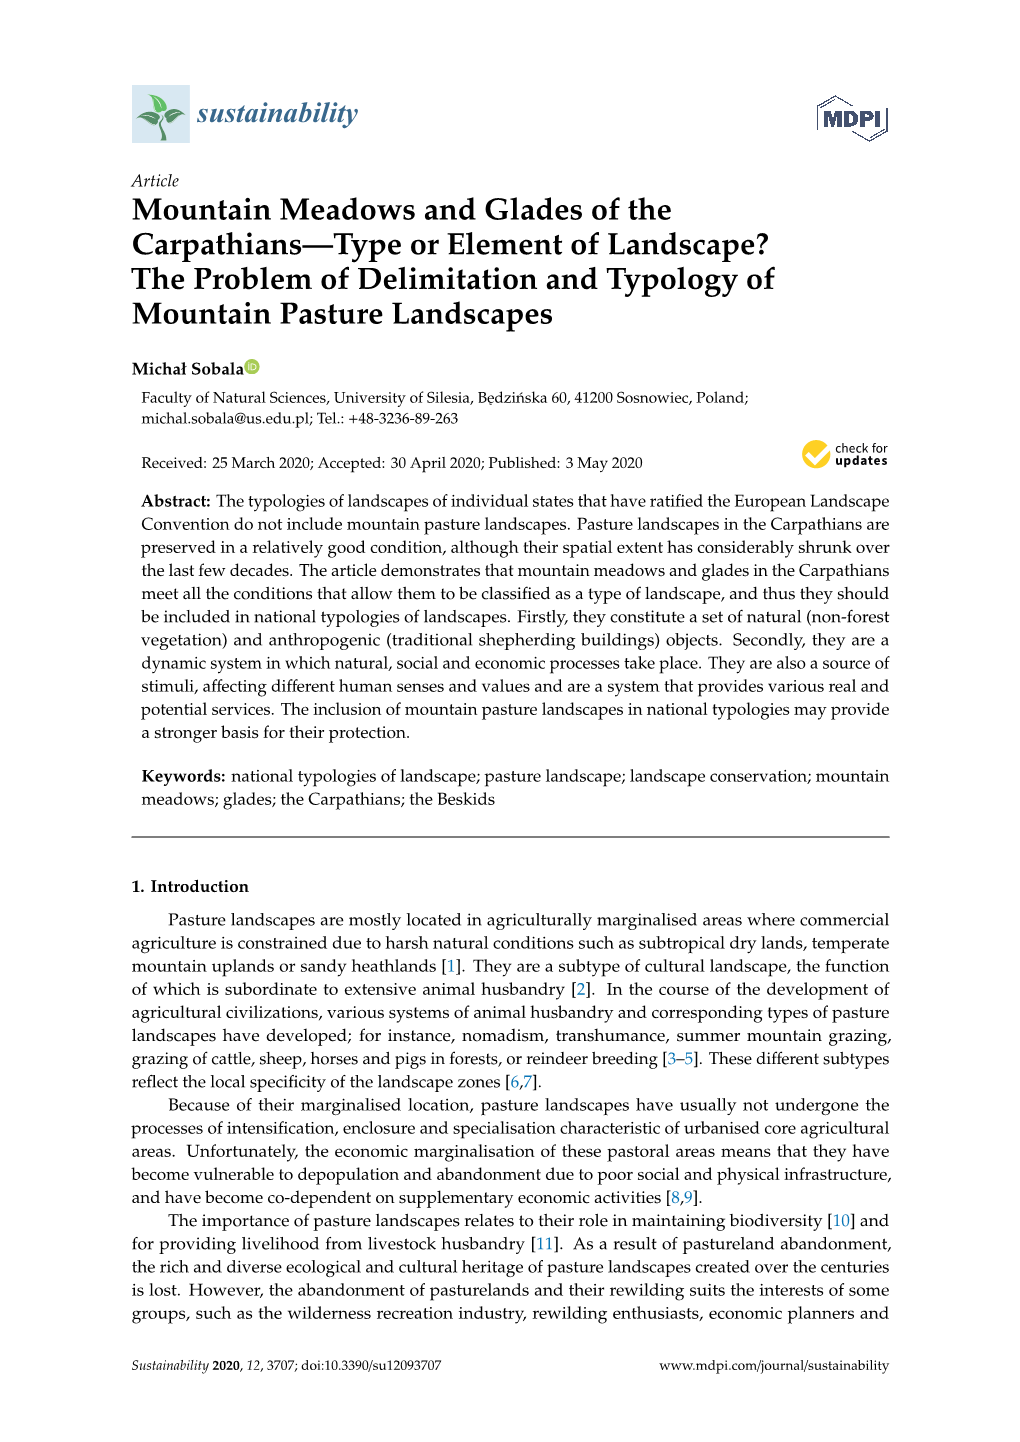 Mountain Meadows and Glades of the Carpathians—Type Or Element of Landscape? the Problem of Delimitation and Typology of Mountain Pasture Landscapes